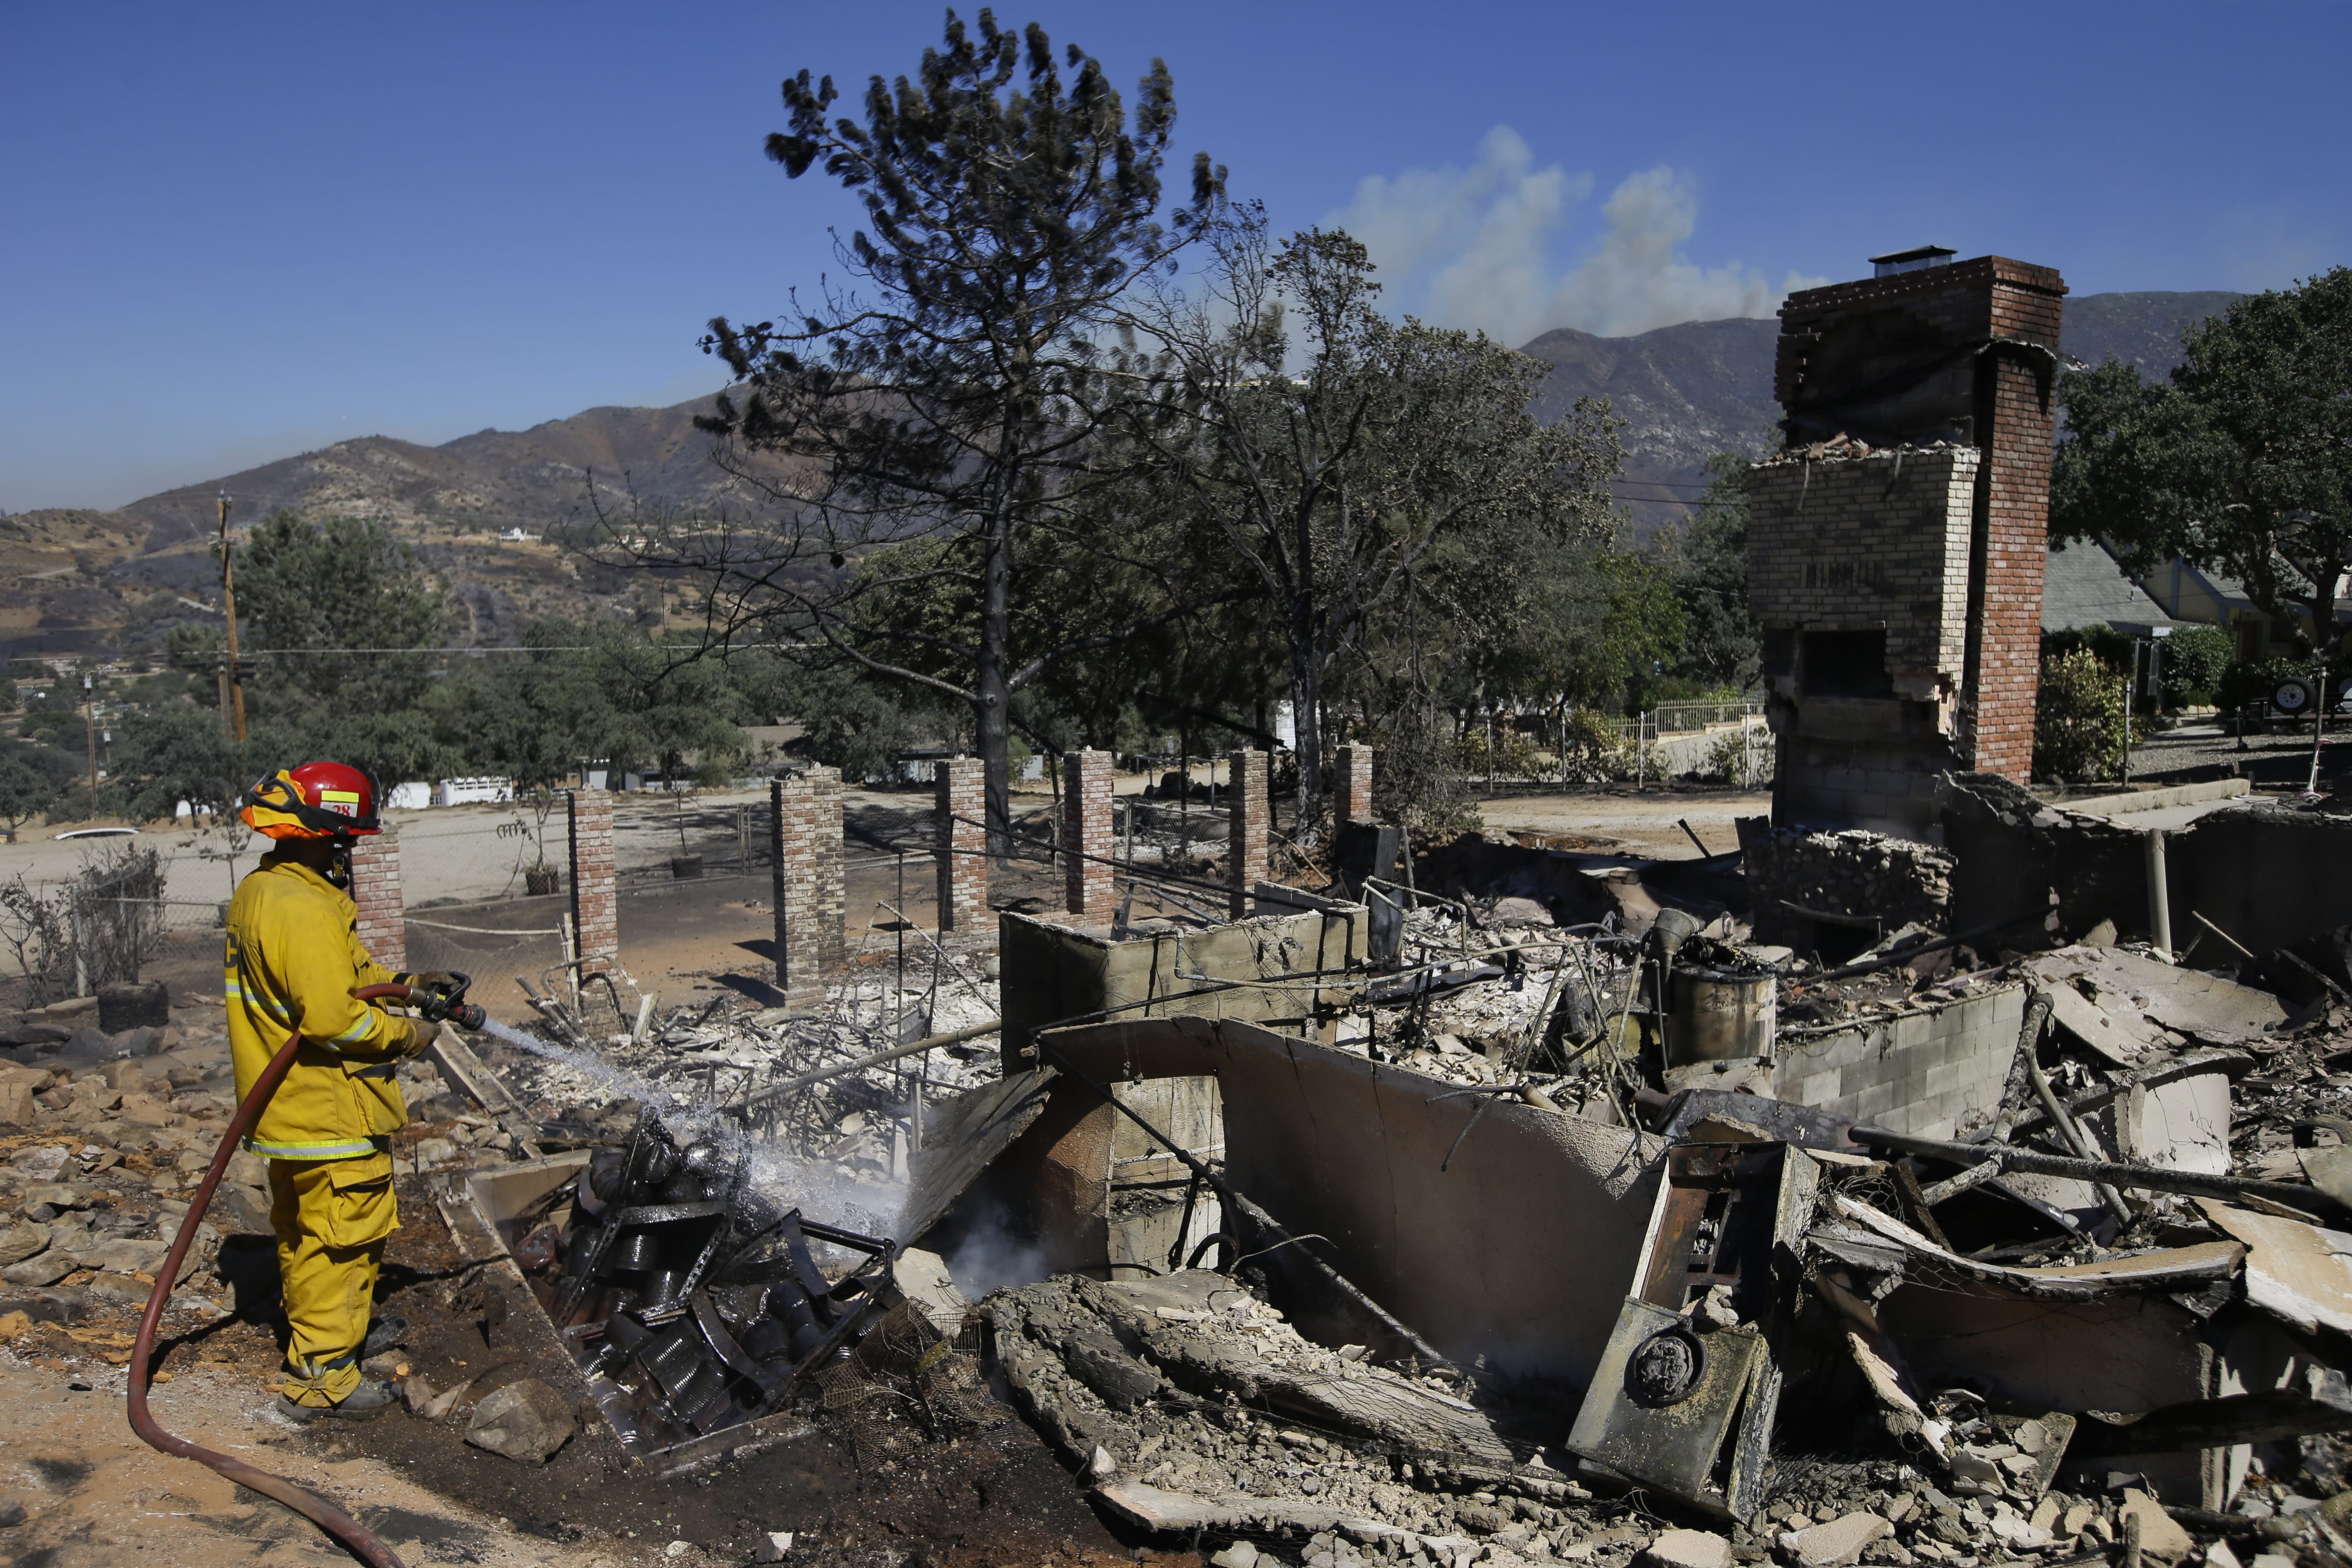 Firefighter Kyle Newton puts out a hotspot at a home scorched by a wildfire Friday, in Mountain Mesa, Calif. (Jae C.